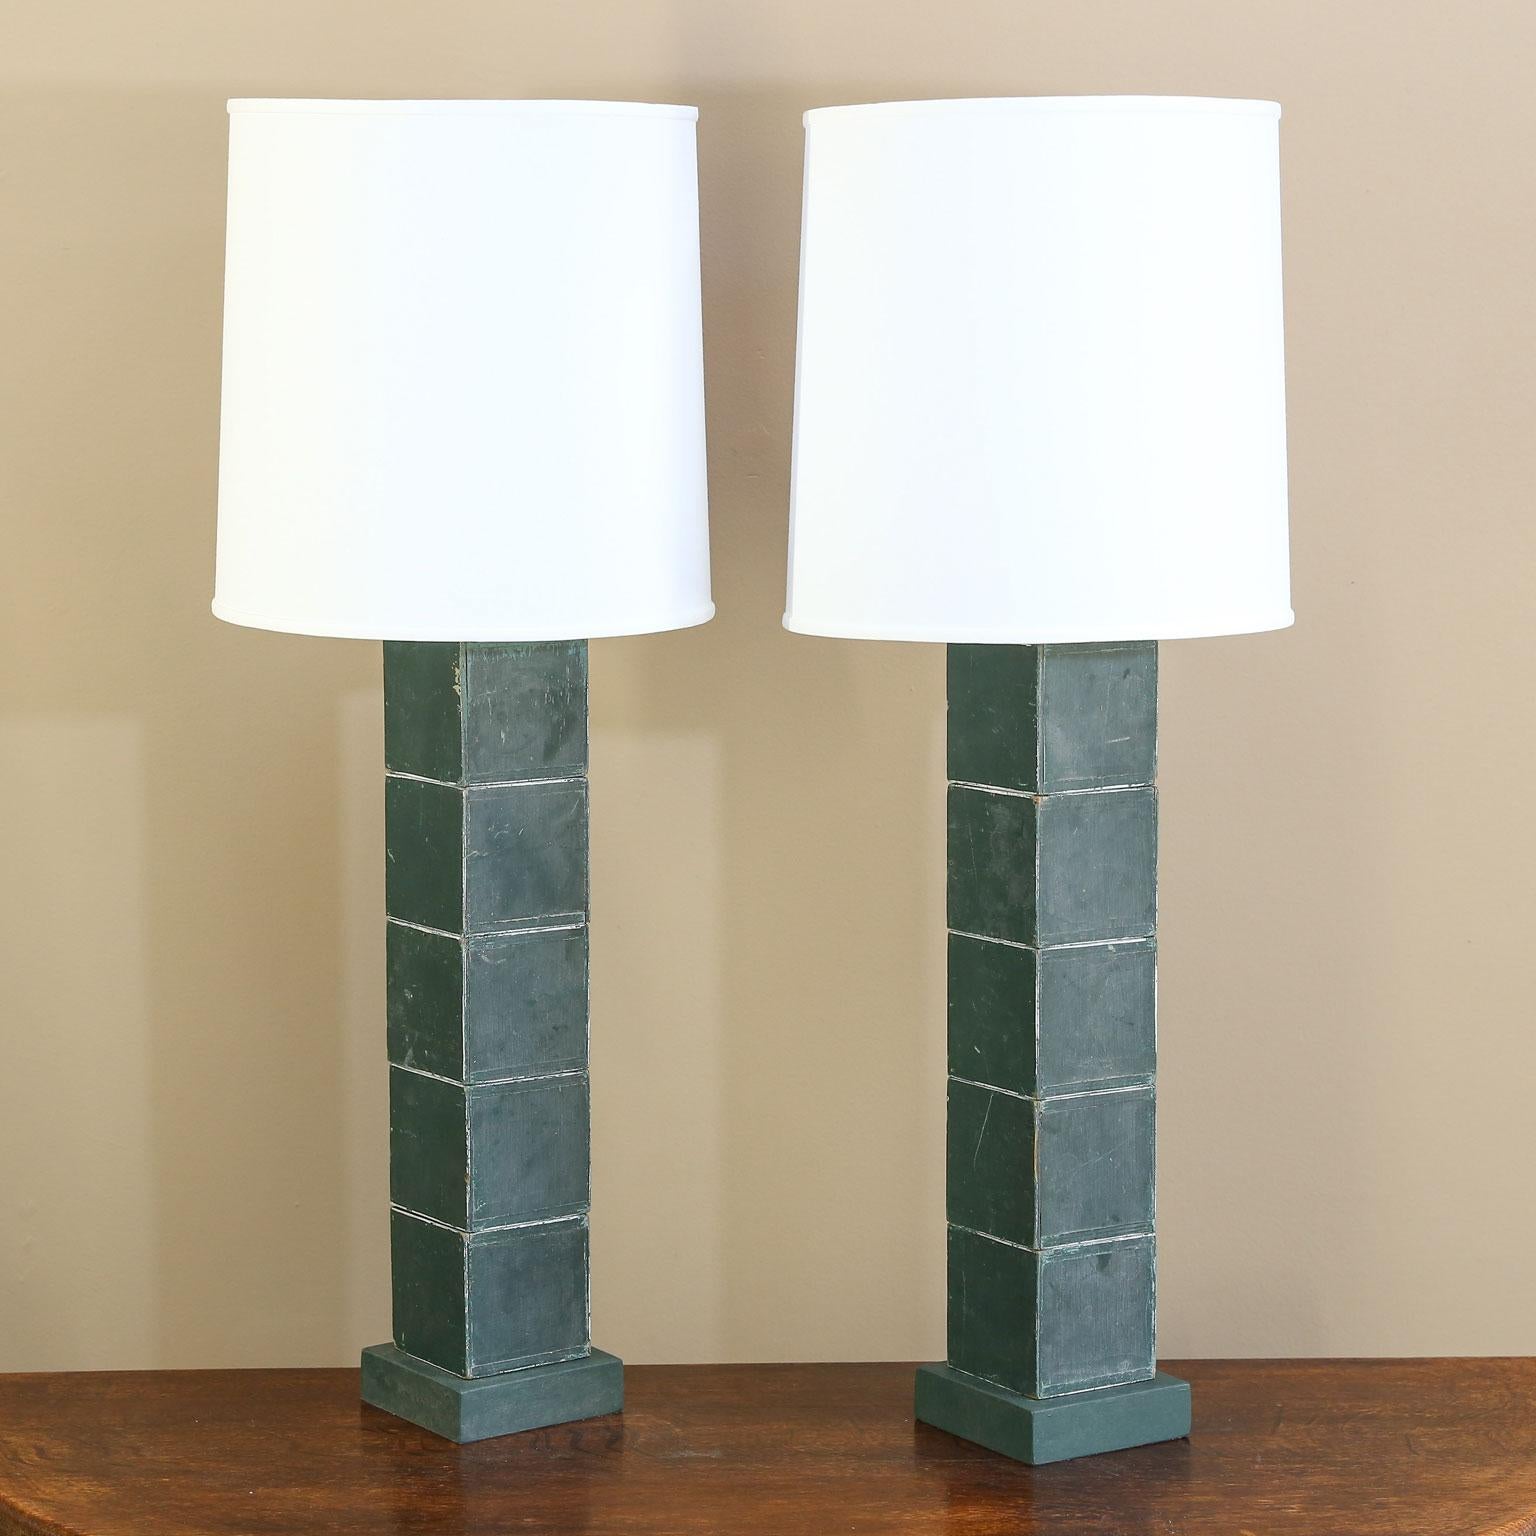 Green Wood Block Pair Custom Table Lamps. Unique, Graphic Design One-of-a-Kind In Good Condition For Sale In Houston, TX